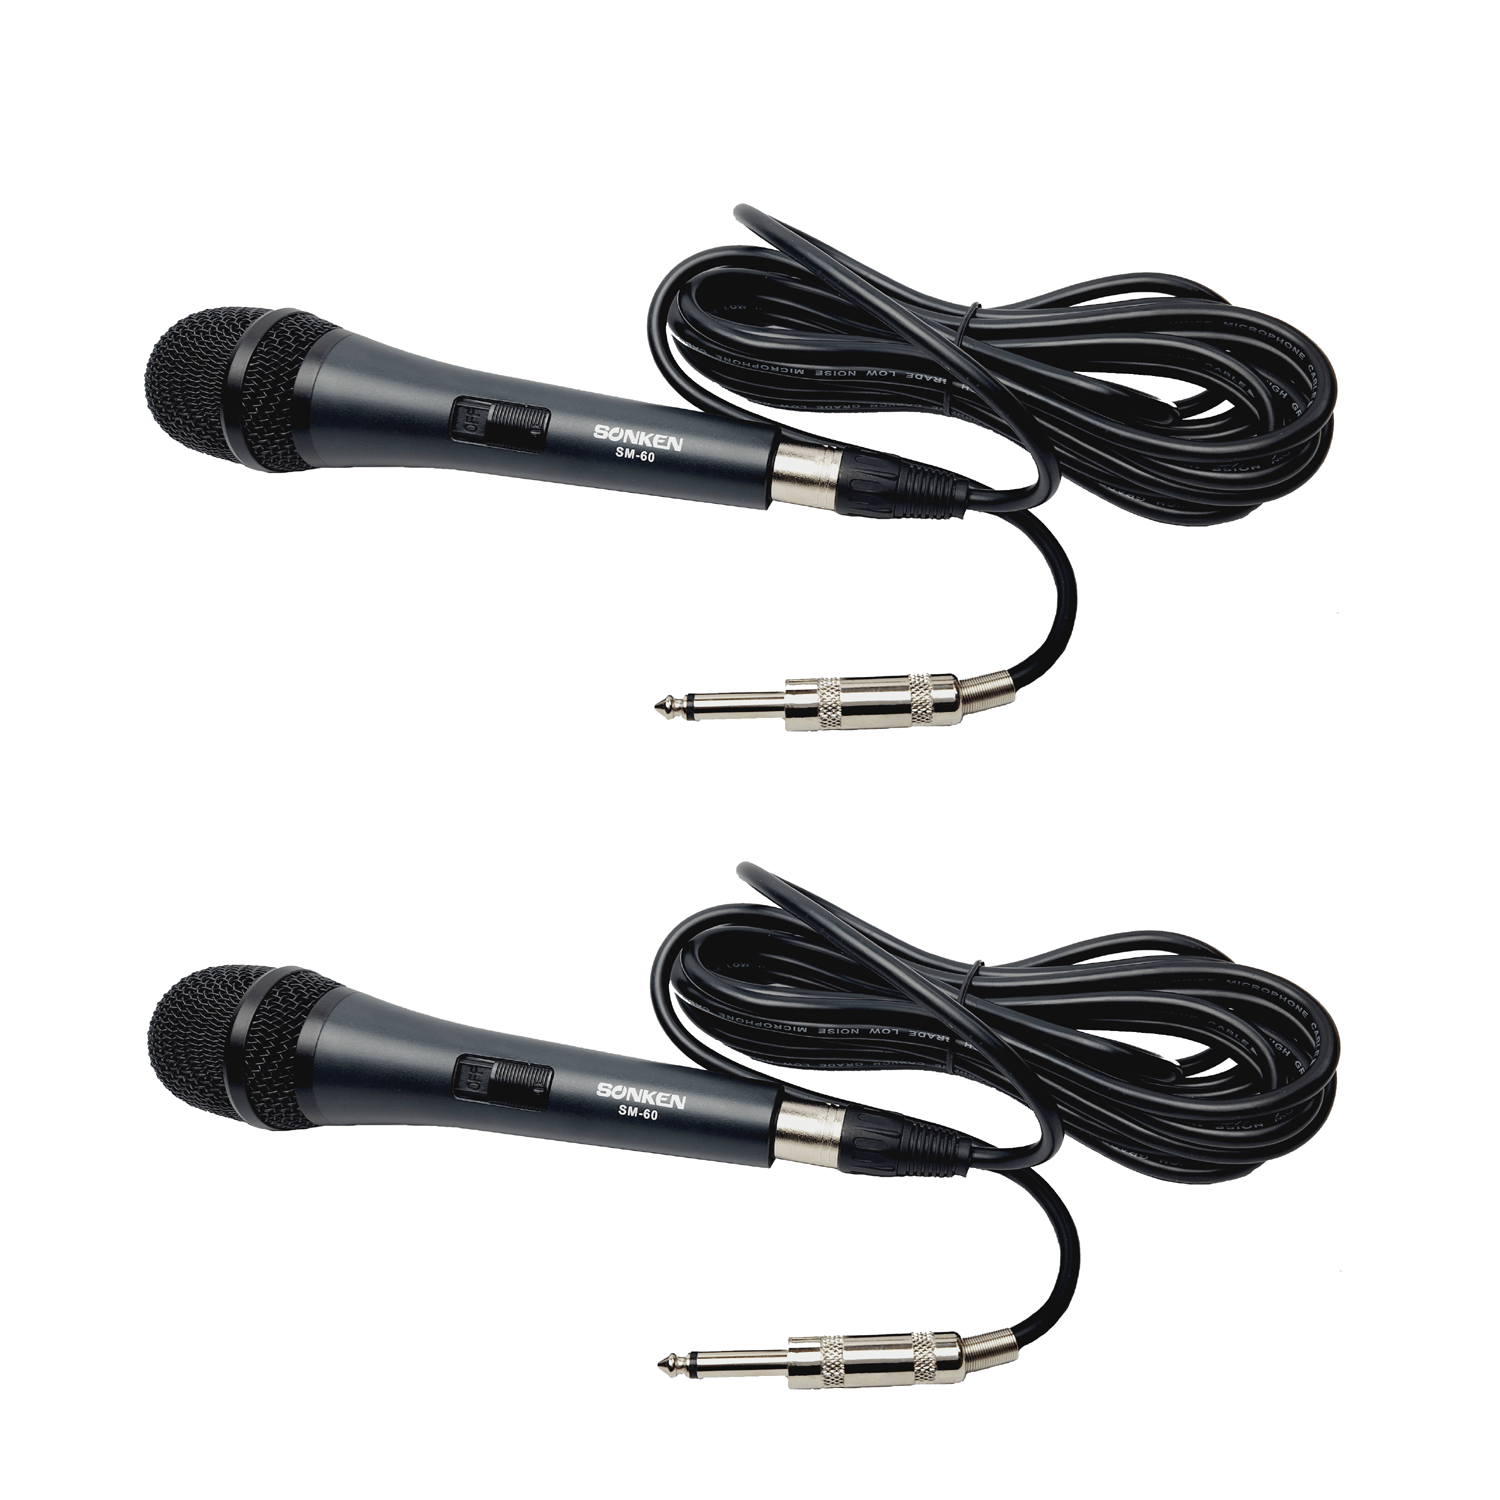 2x Sonken Professonal Wired Microphone with 5m Cable (6.35mm Jack) - Karaoke Home Entertainment